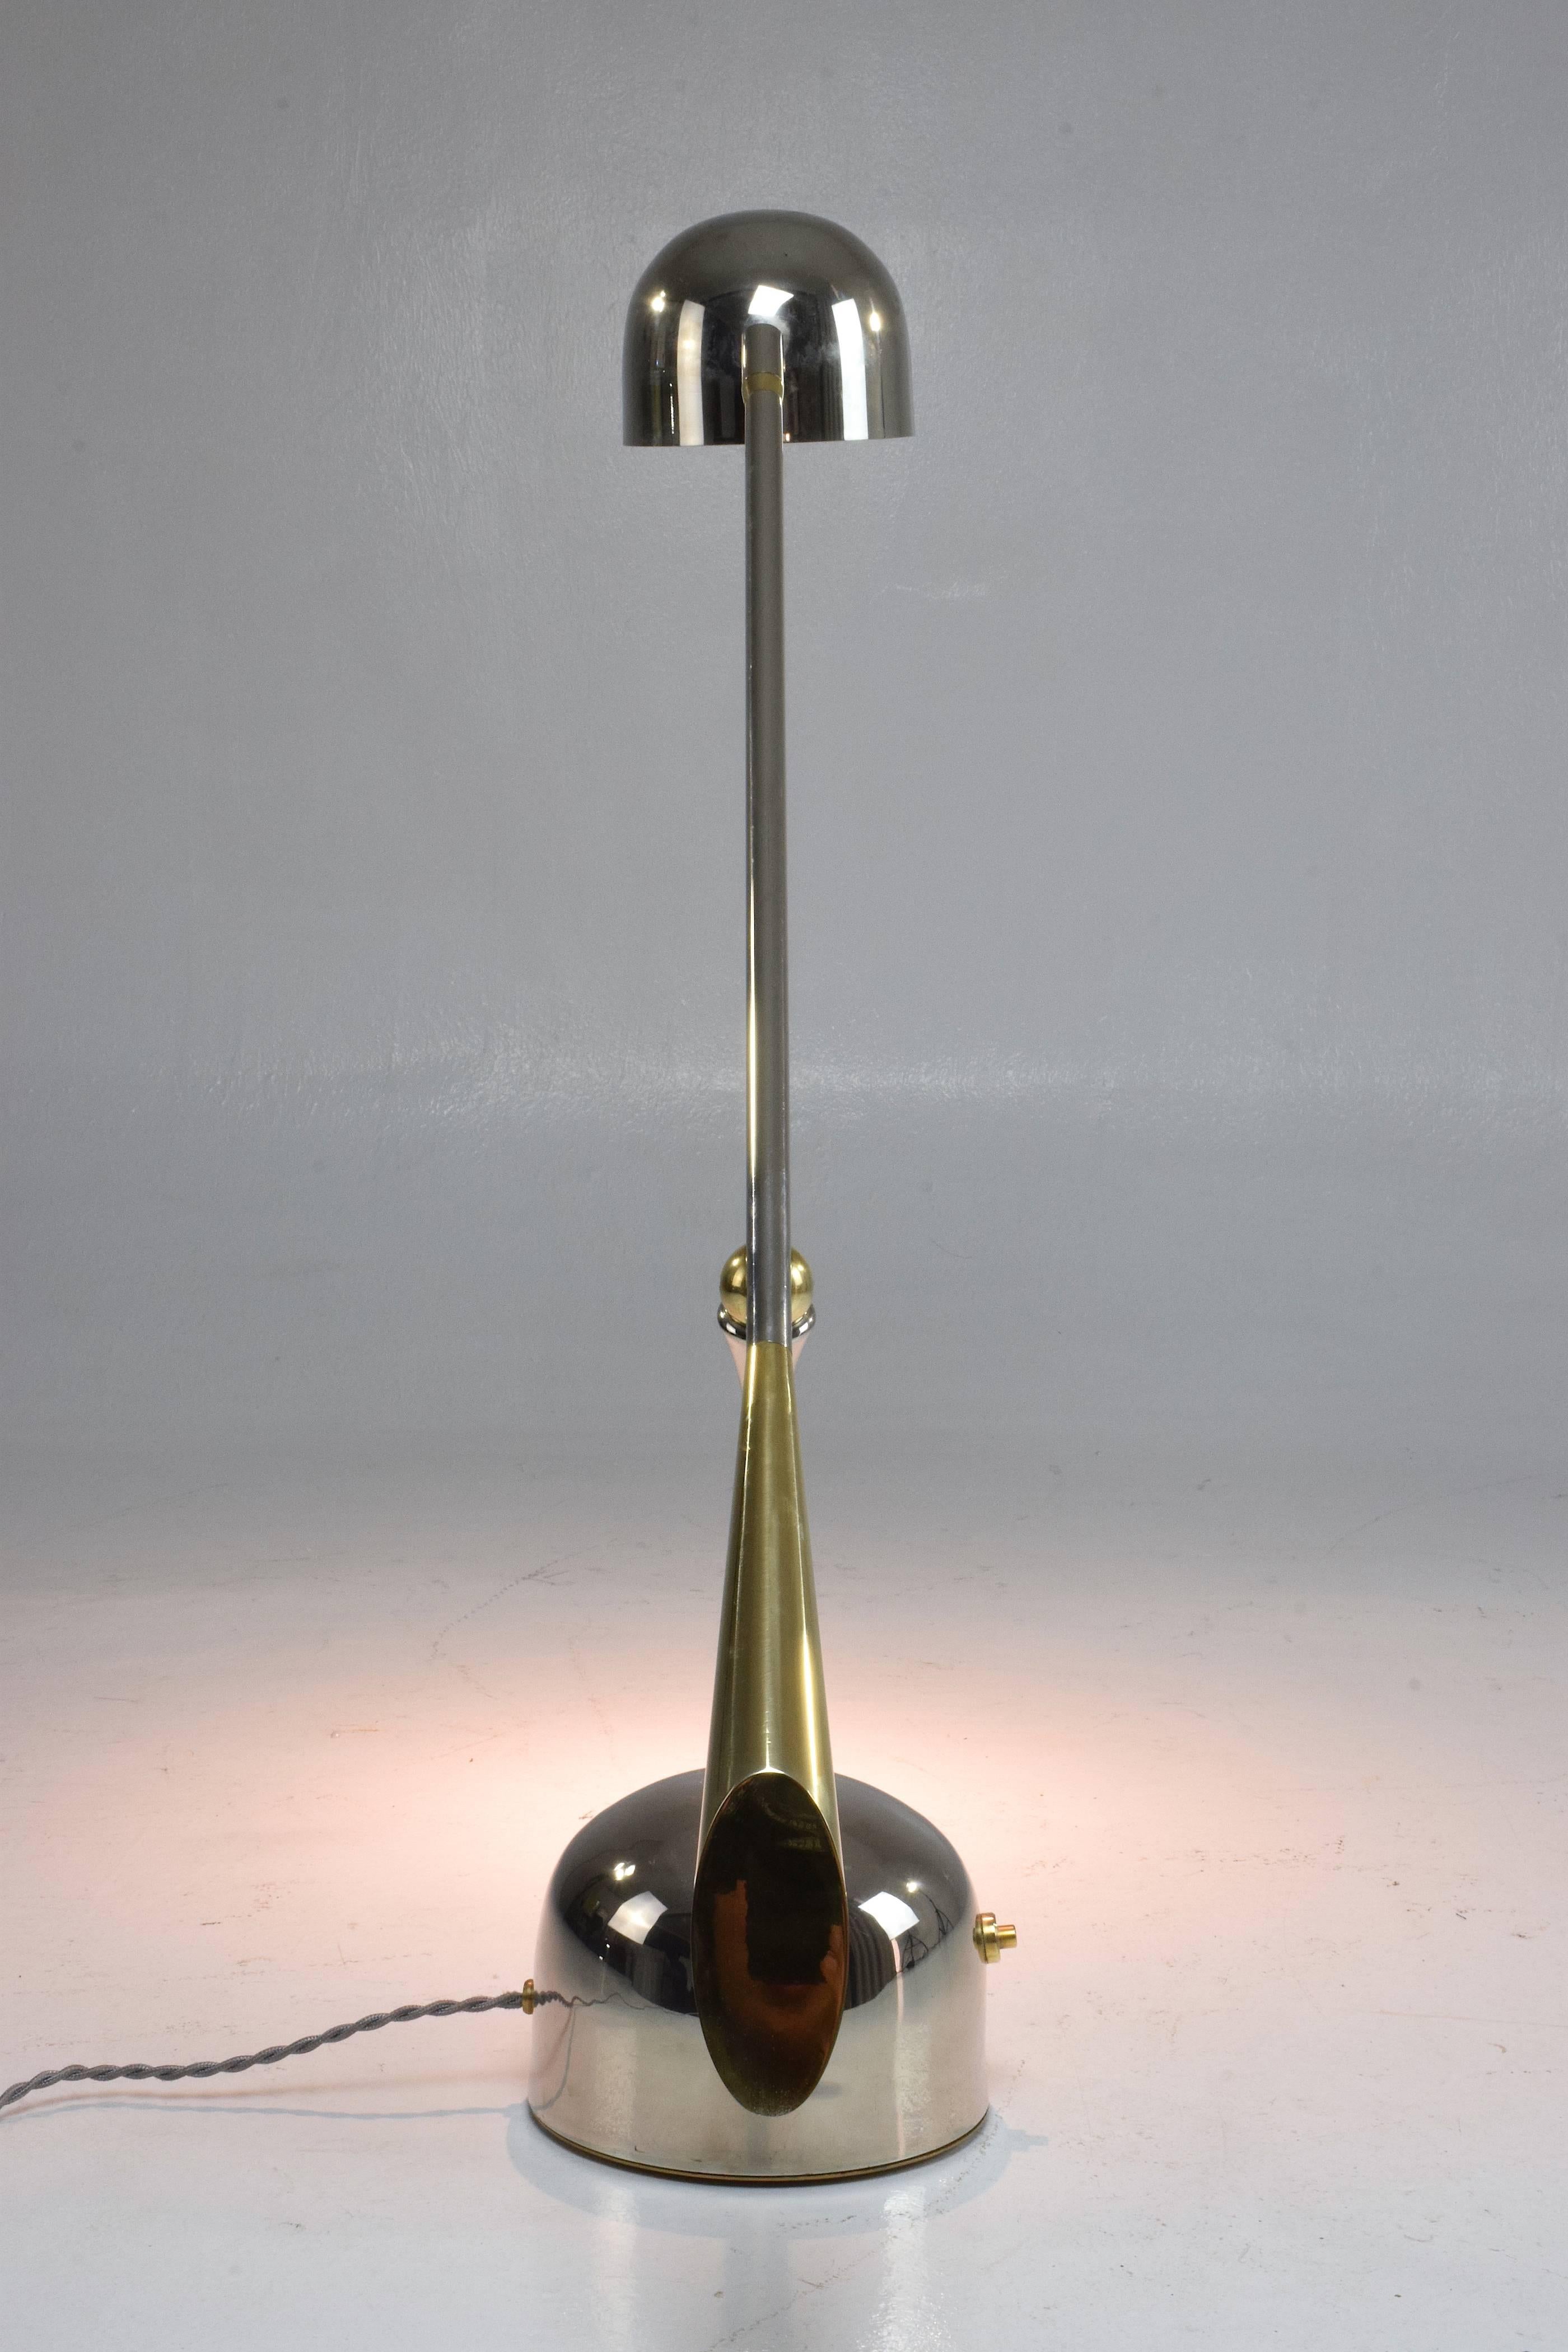 Nickel Continuum-II Contemporary Brass Double Articulating Lamp